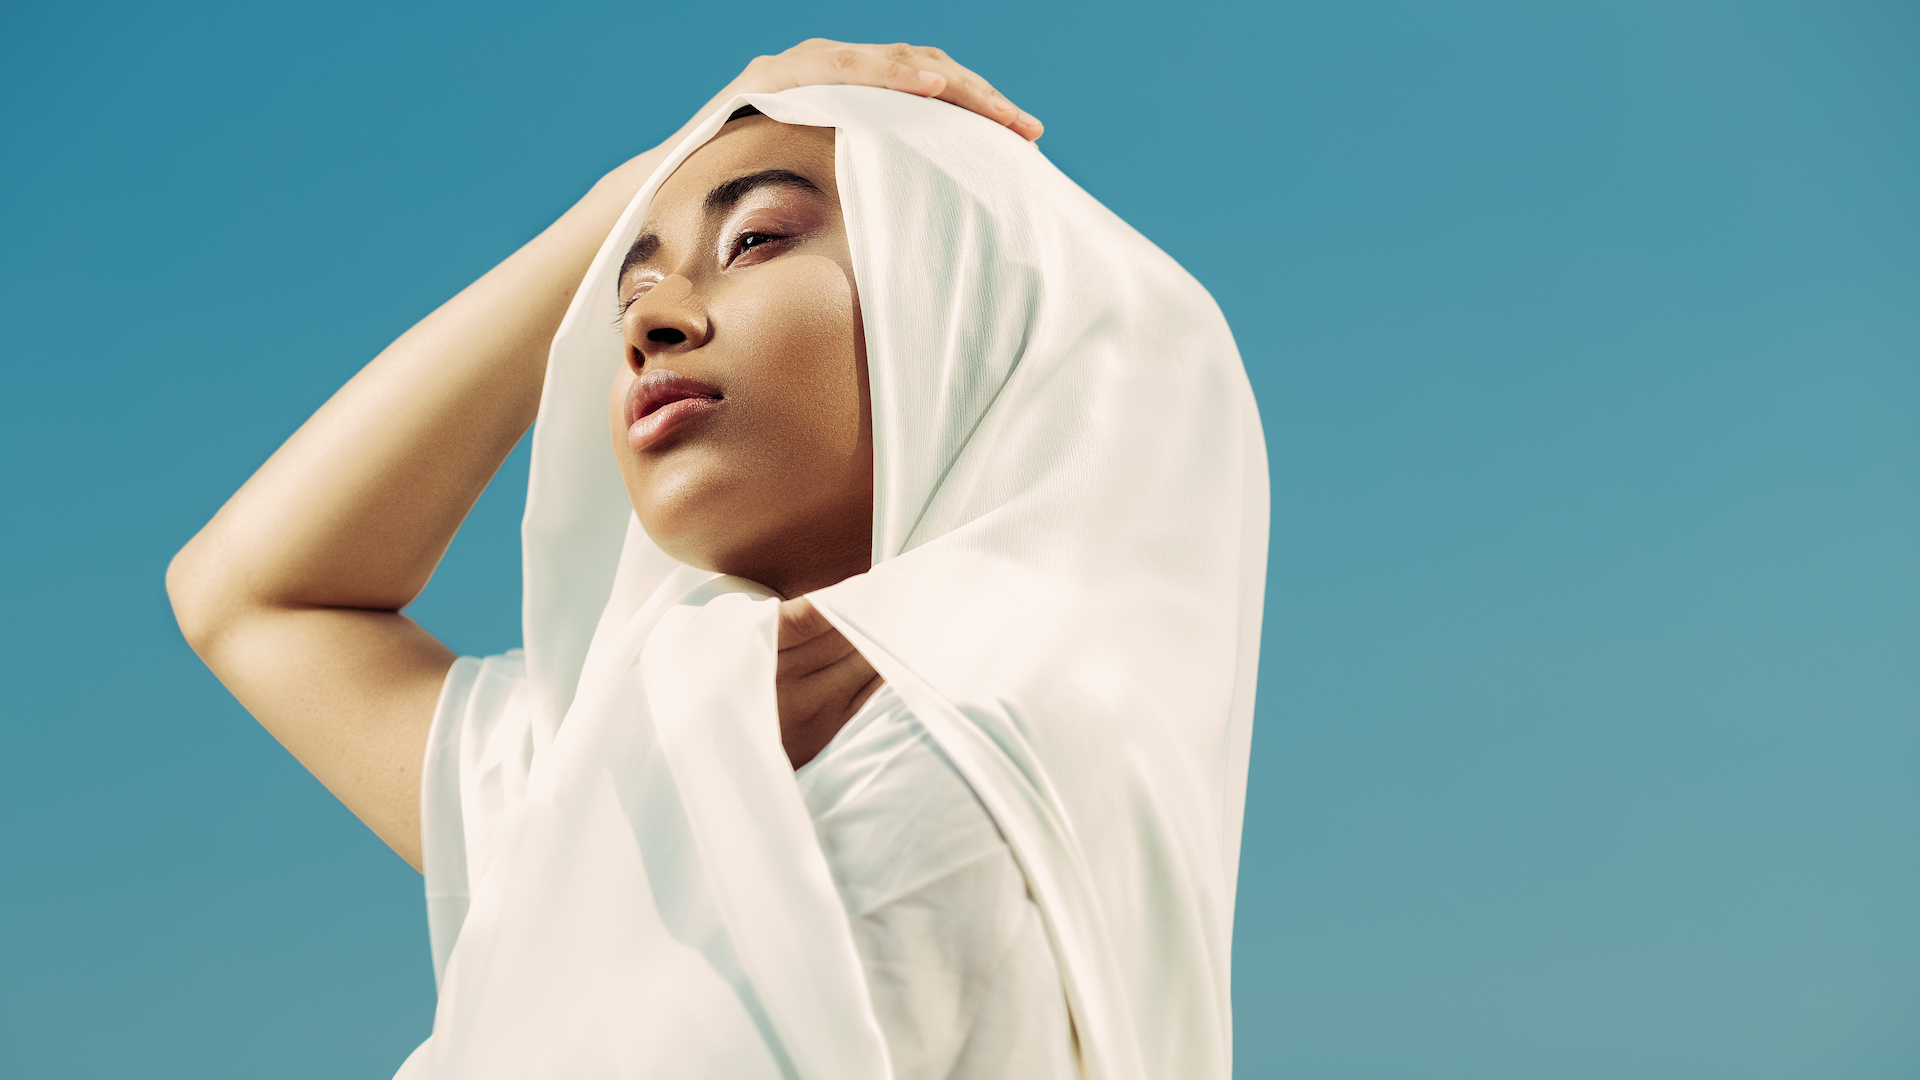 500px Commercial Grants: Intersectional Diversity